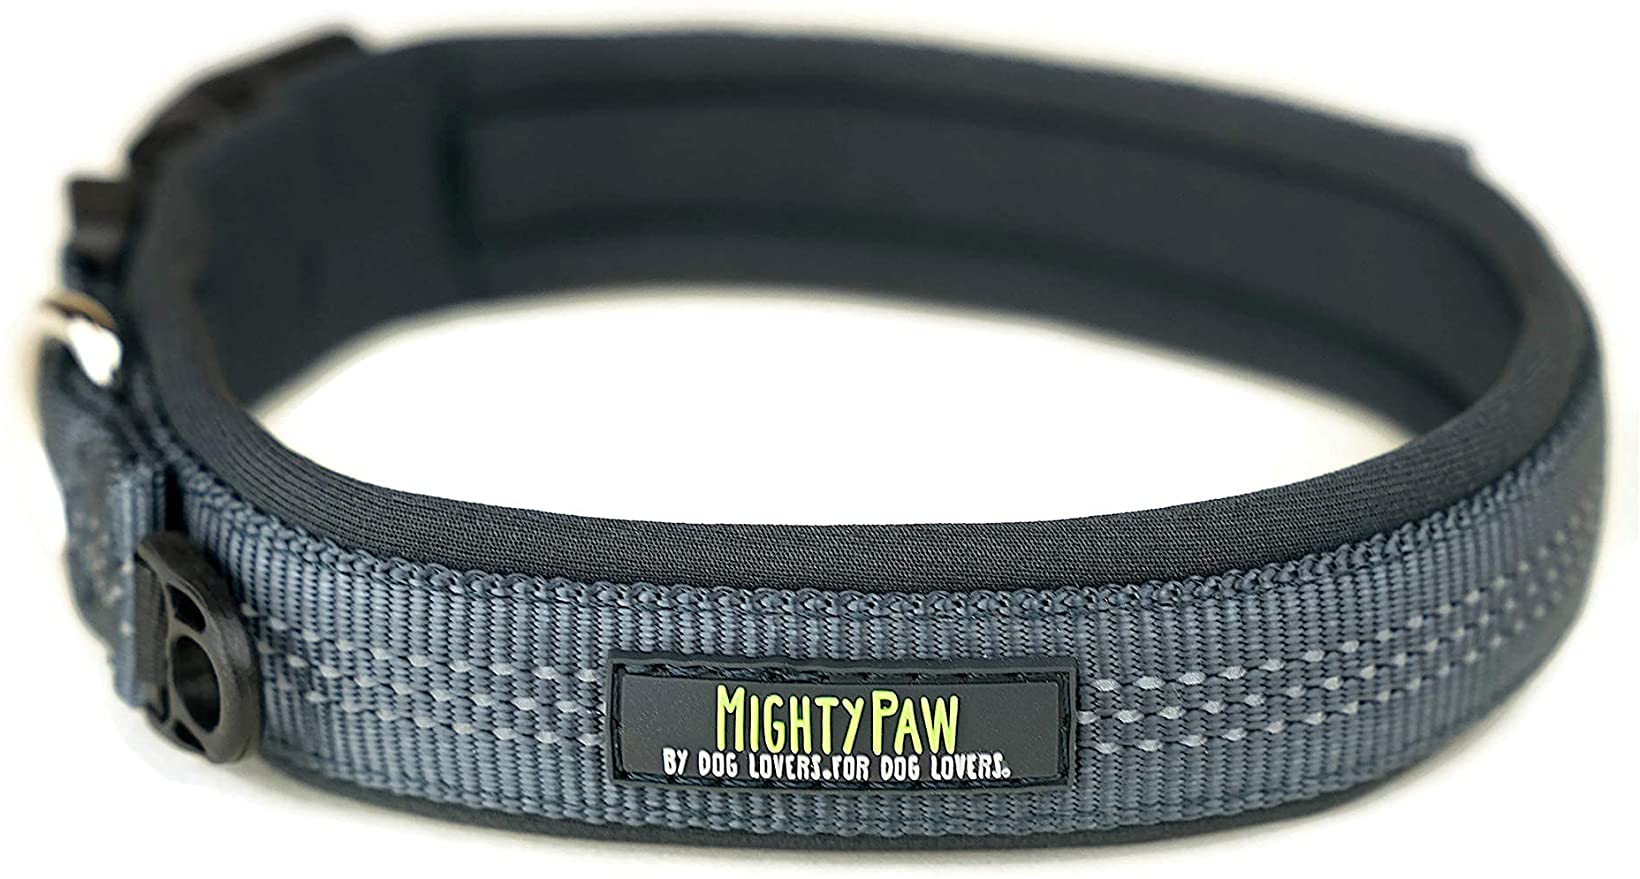 Running Dog Collar, Mighty Paw Neoprene Padded Dog Collar, Premium Quality Sports Collar with Reflective Stitching, Extra Comfort for Active Dogs (Grey- Medium 15-18")